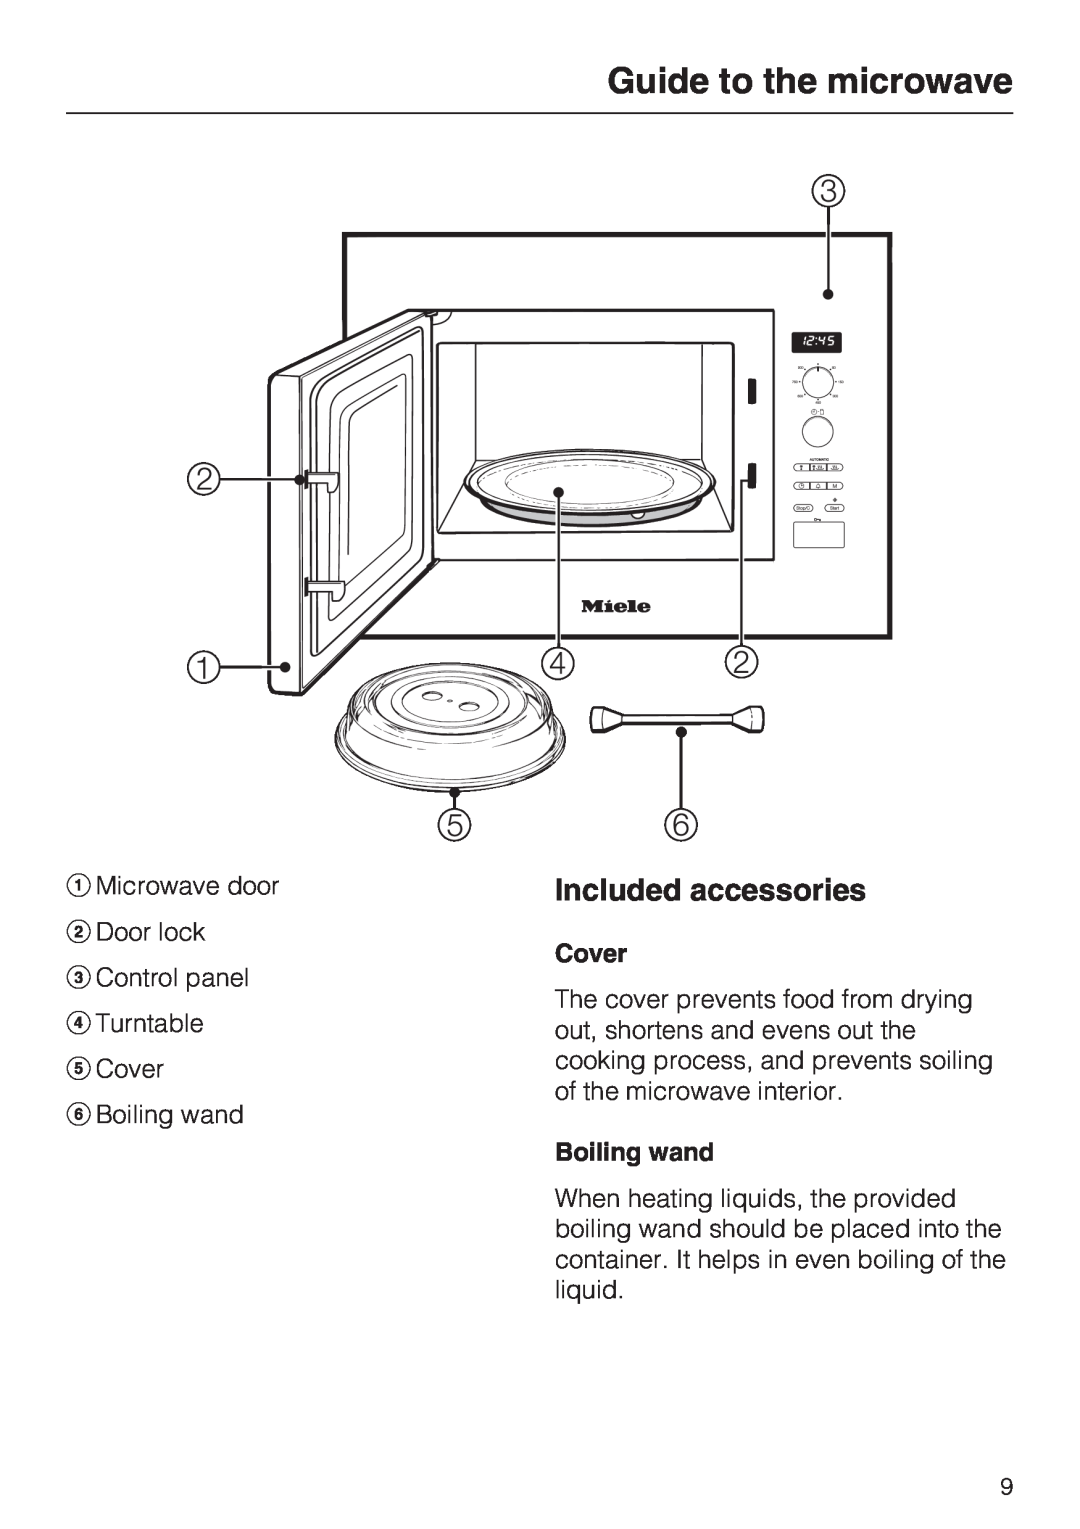 Miele M8260-1 installation instructions Guide to the microwave, Included accessories, Cover, Boiling wand 